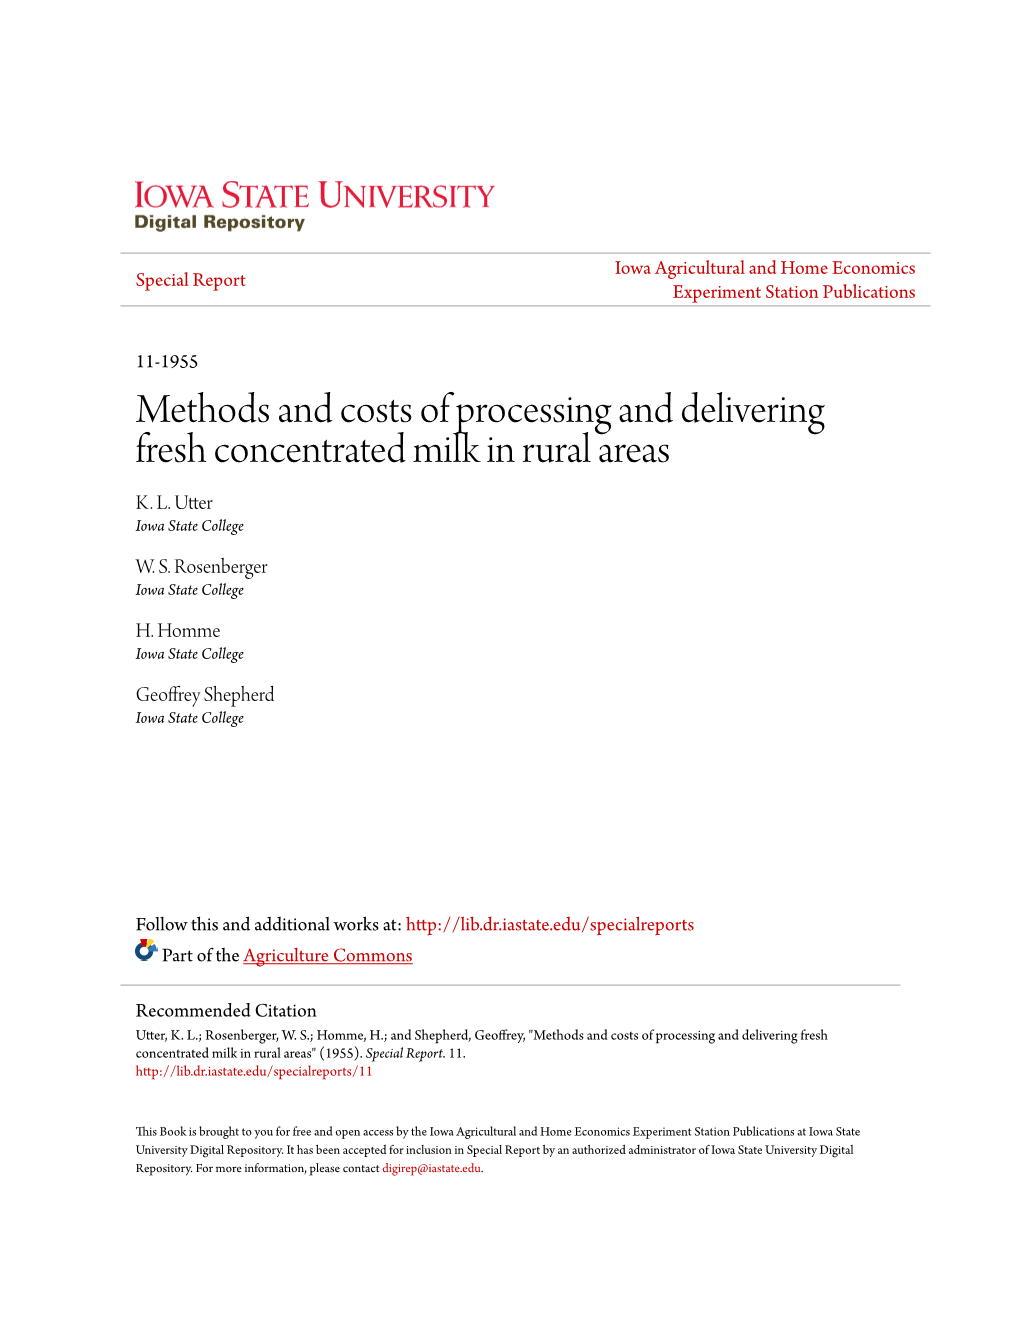 Methods and Costs of Processing and Delivering Fresh Concentrated Milk in Rural Areas K